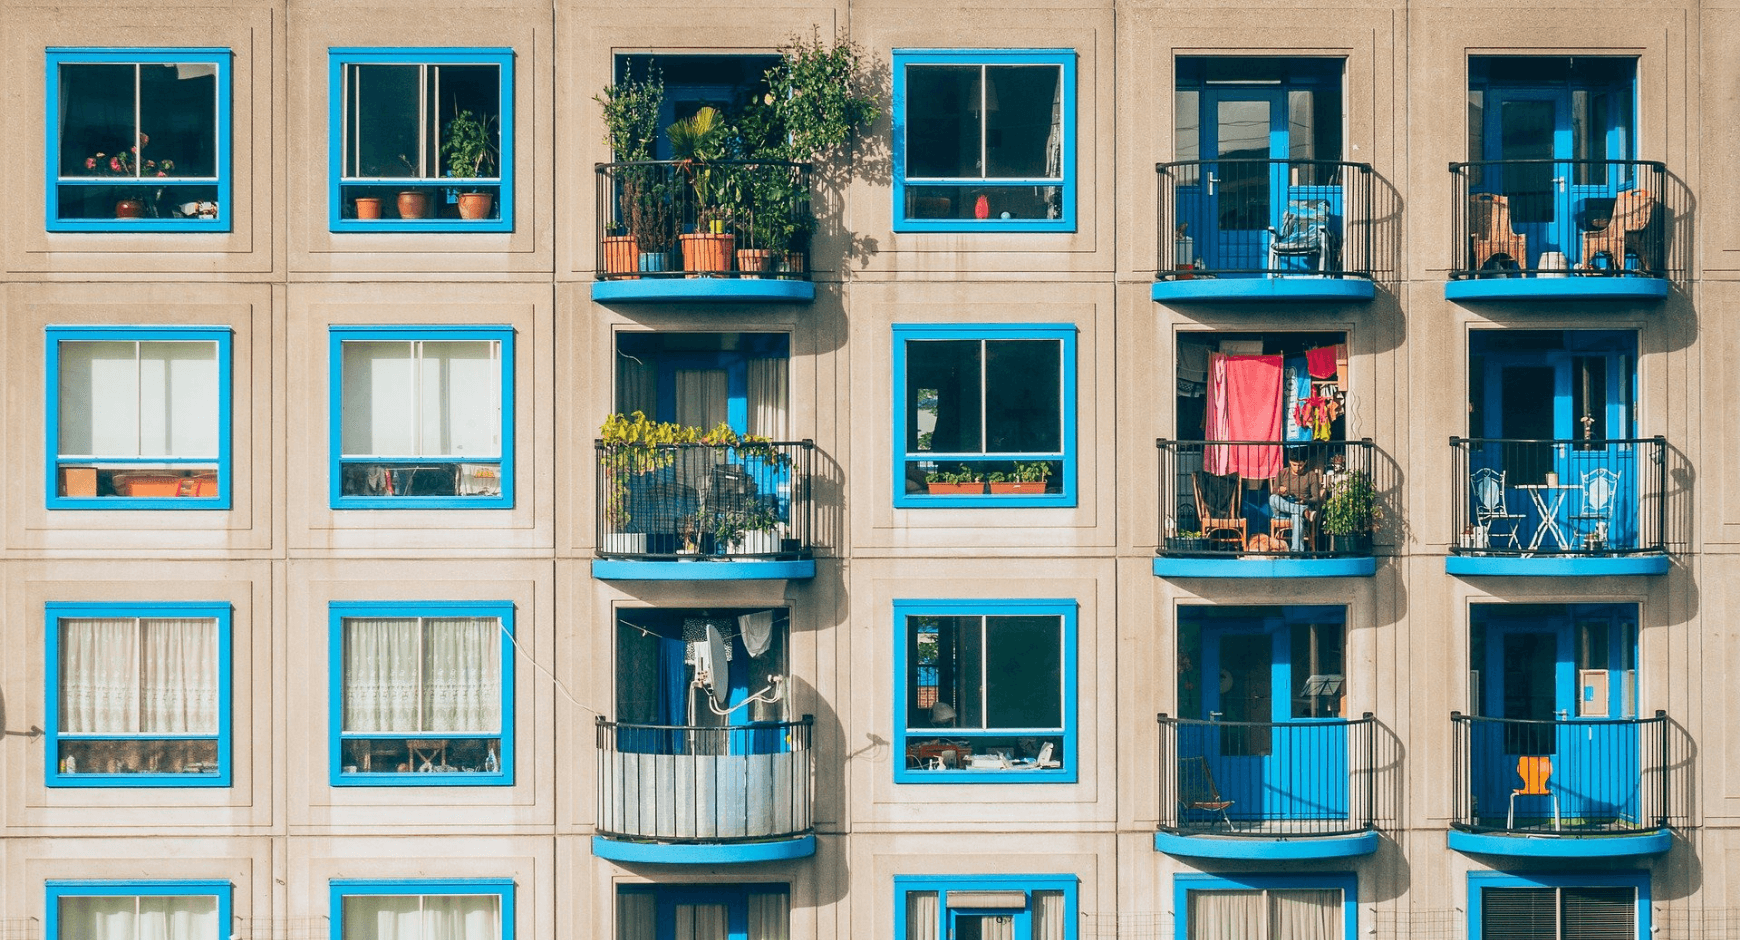 Image of an apartment building with fun, colorful exterior window trim